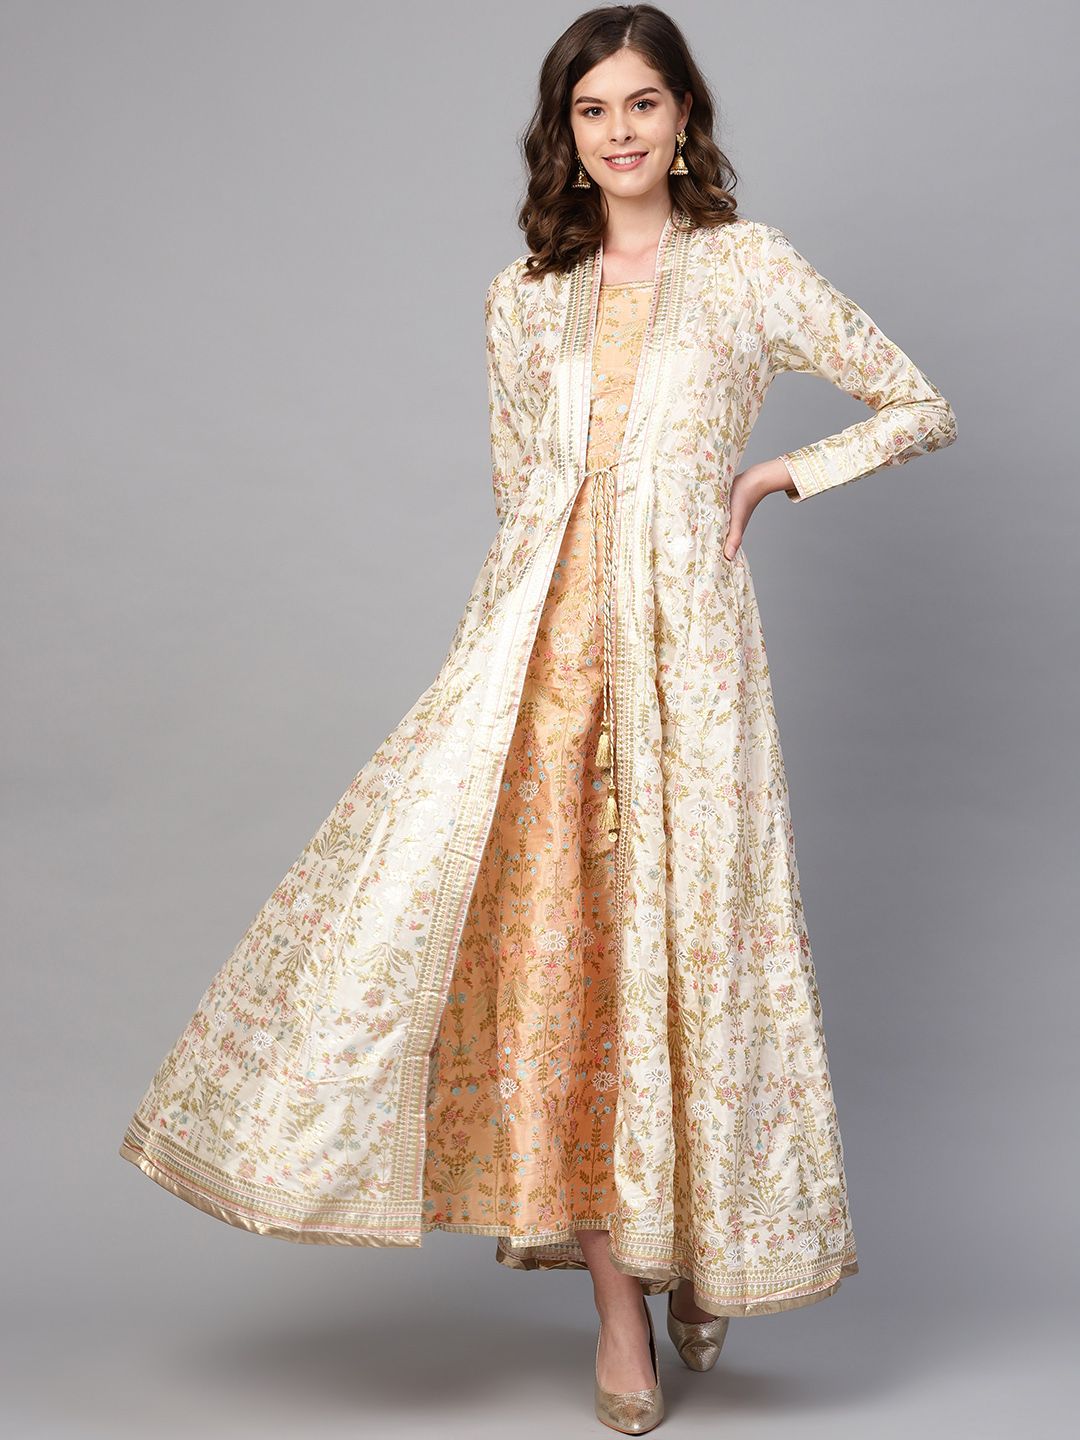 W Women Cream-Coloured & Golden Floral Printed Layered Maxi Dress